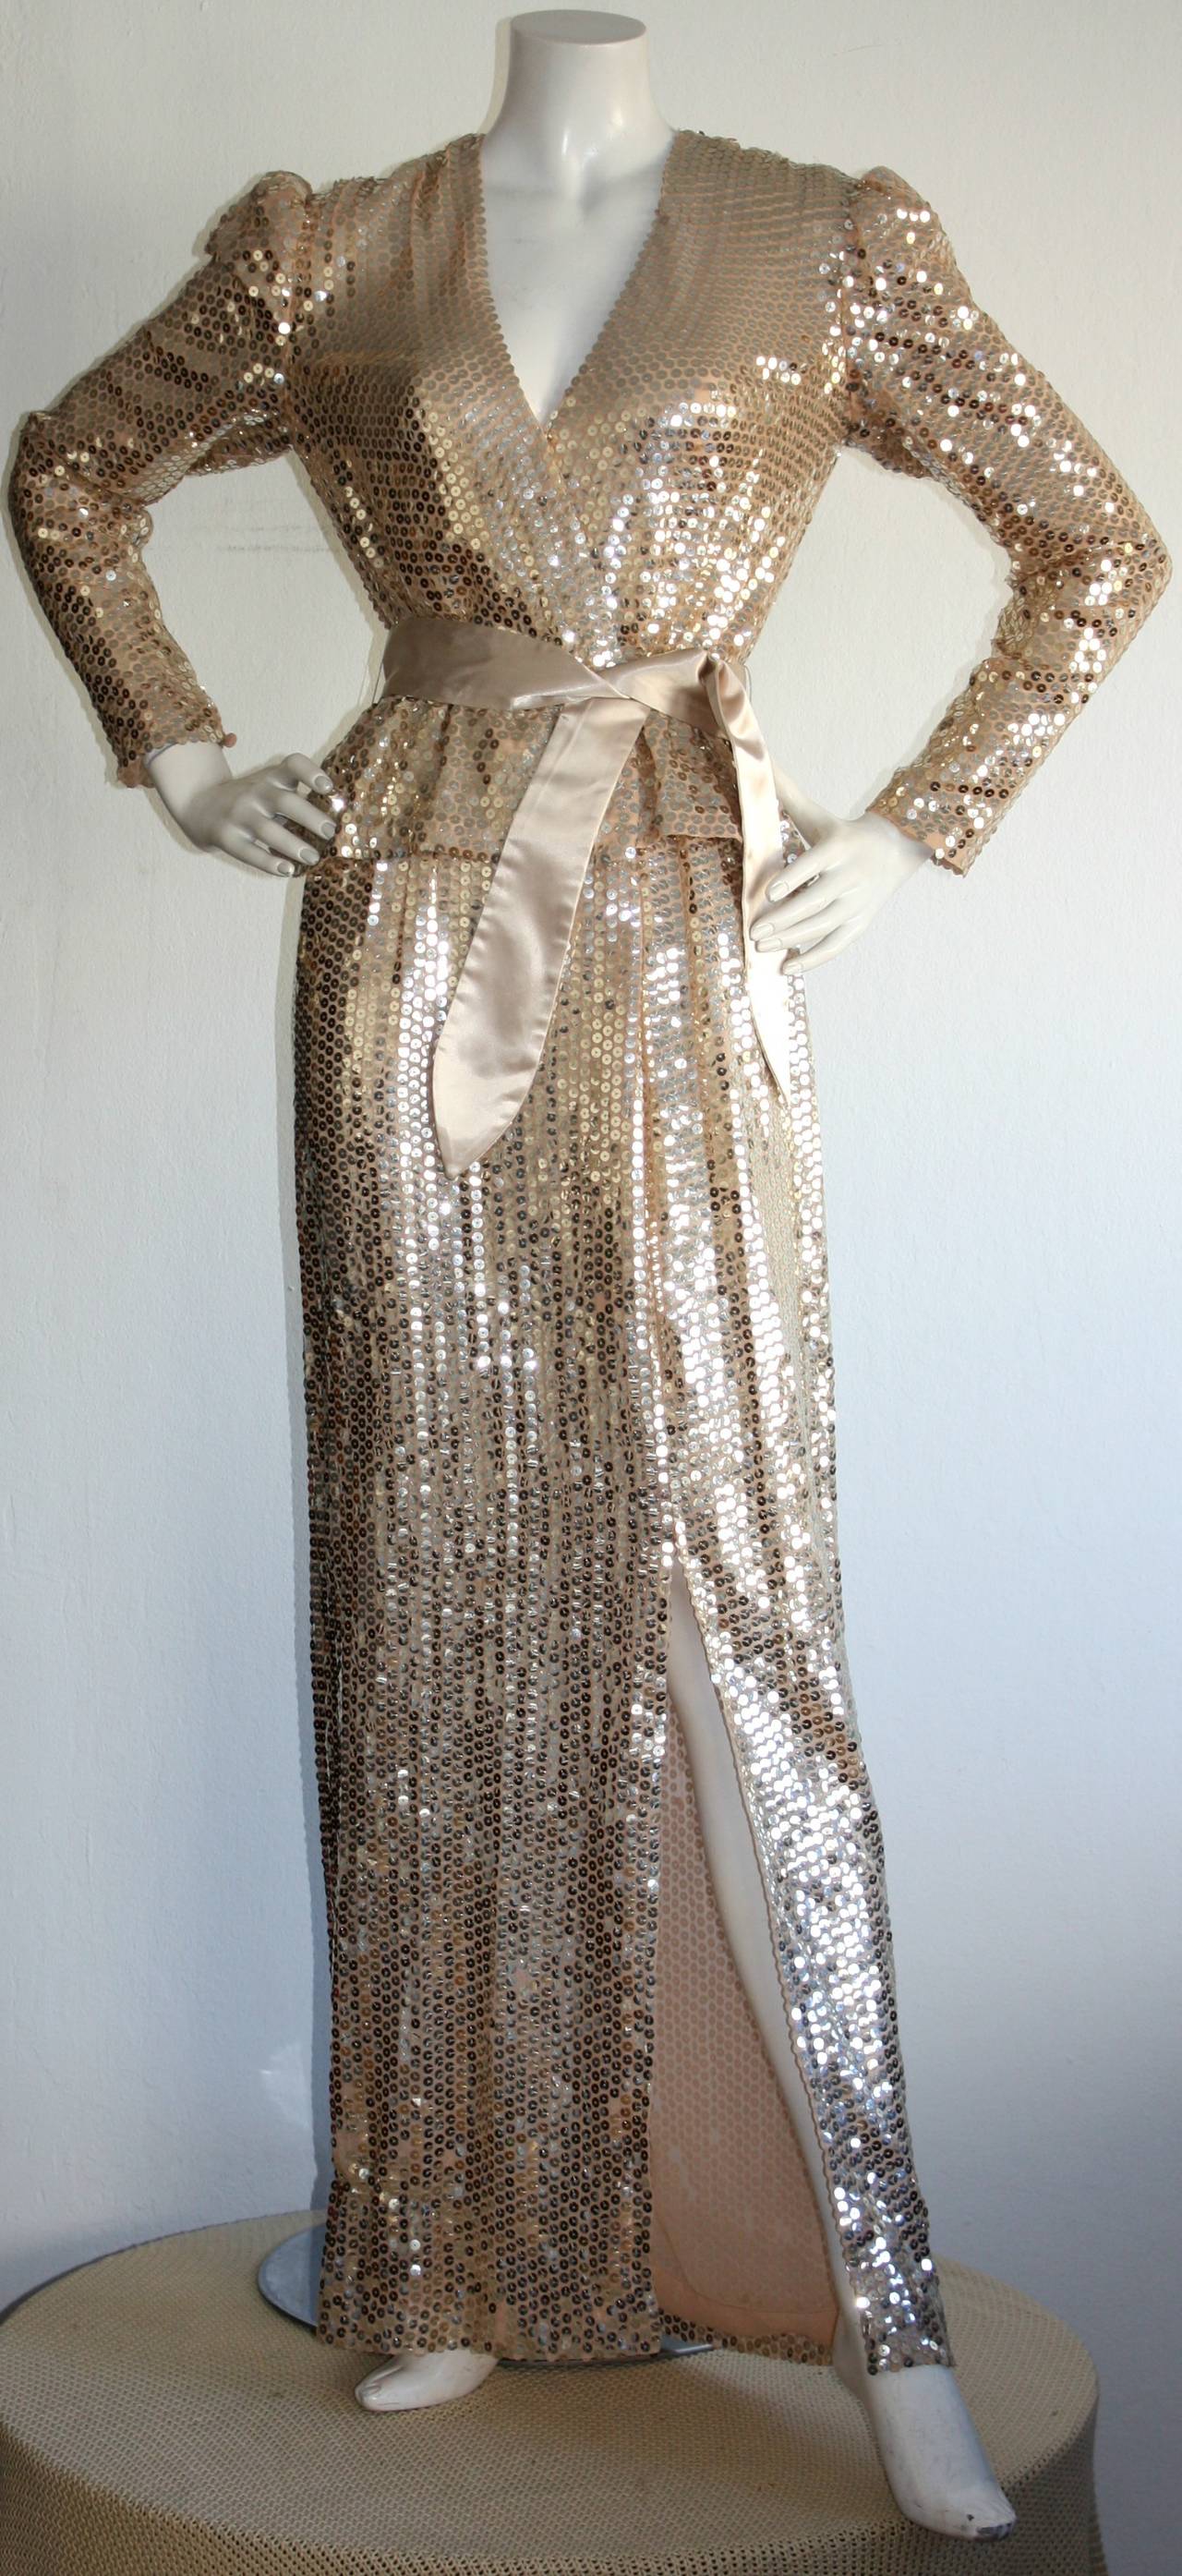 Incredible vintage Estevez gold/champagne fully sequin gown. Original champagne silk sash/belt. Hook-and-eye at bust. Fully lined. In great condition. Approximately Size 4-6

Measurements:
38 inch bust
28 inch waist
40 inch hips
60 inches from